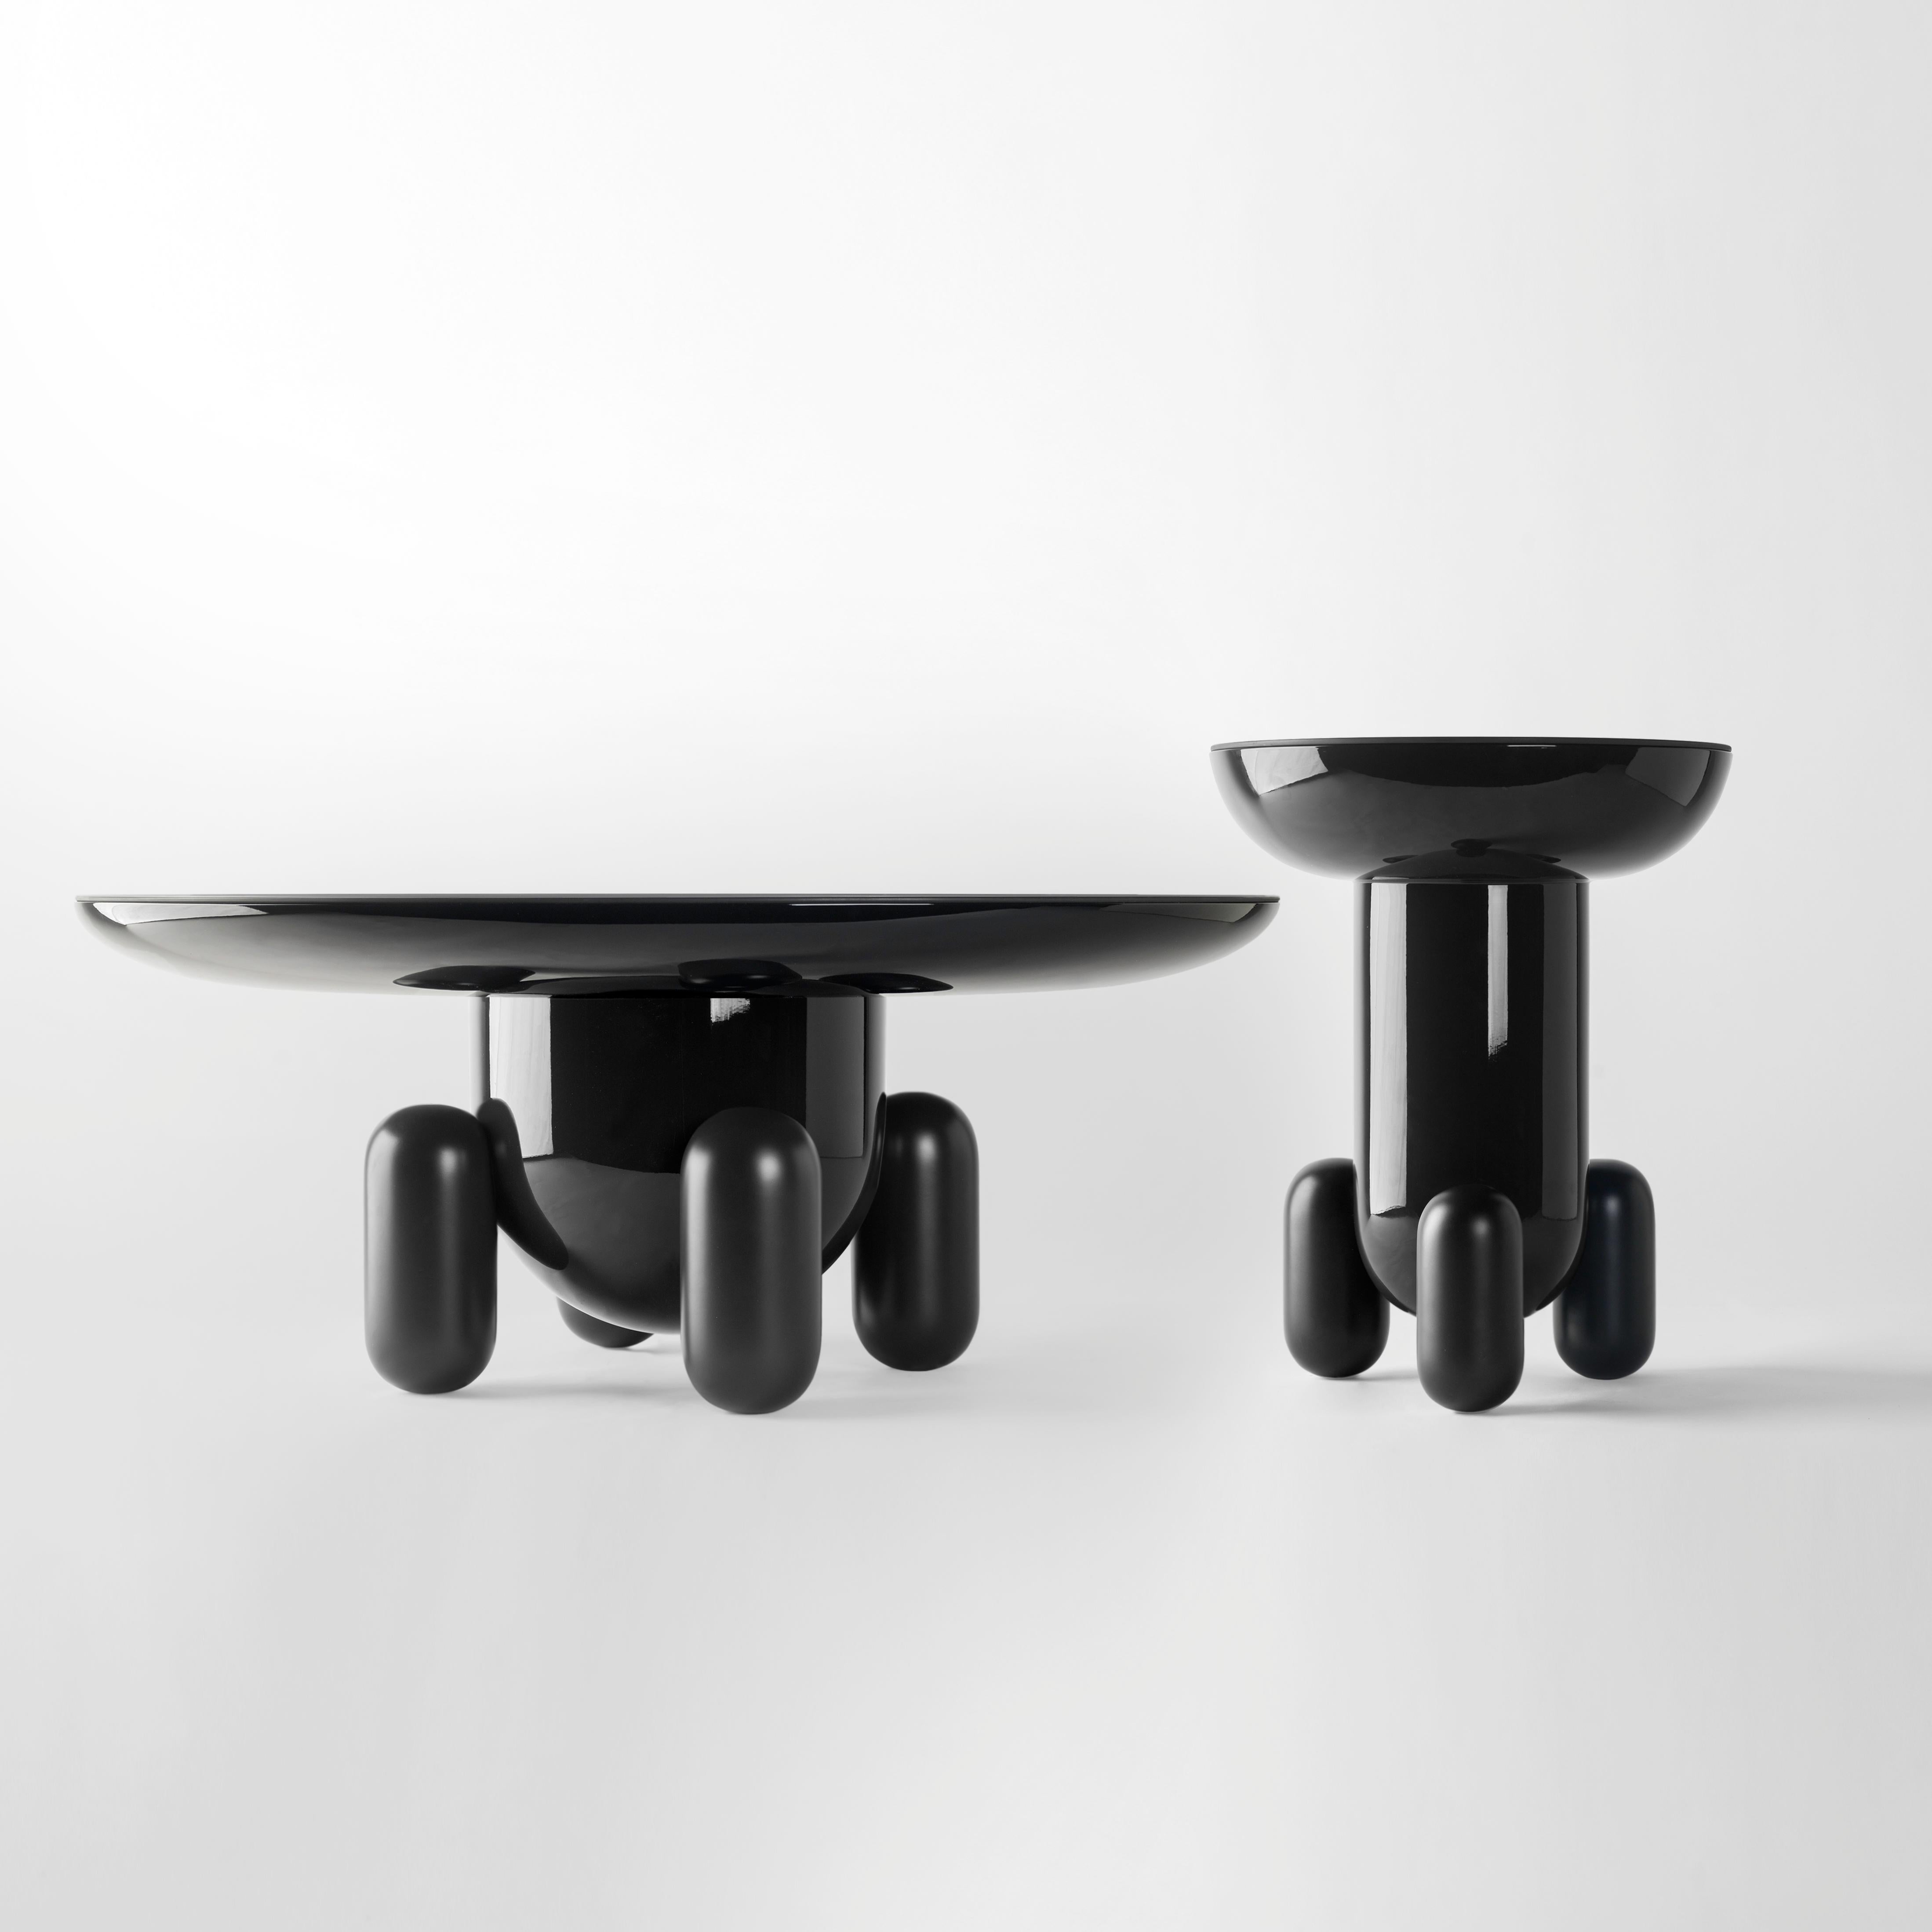 Pair of Jaime Hayon Dark Grey Explorer #03 & #01 Tables by BD Barcelona For Sale 1